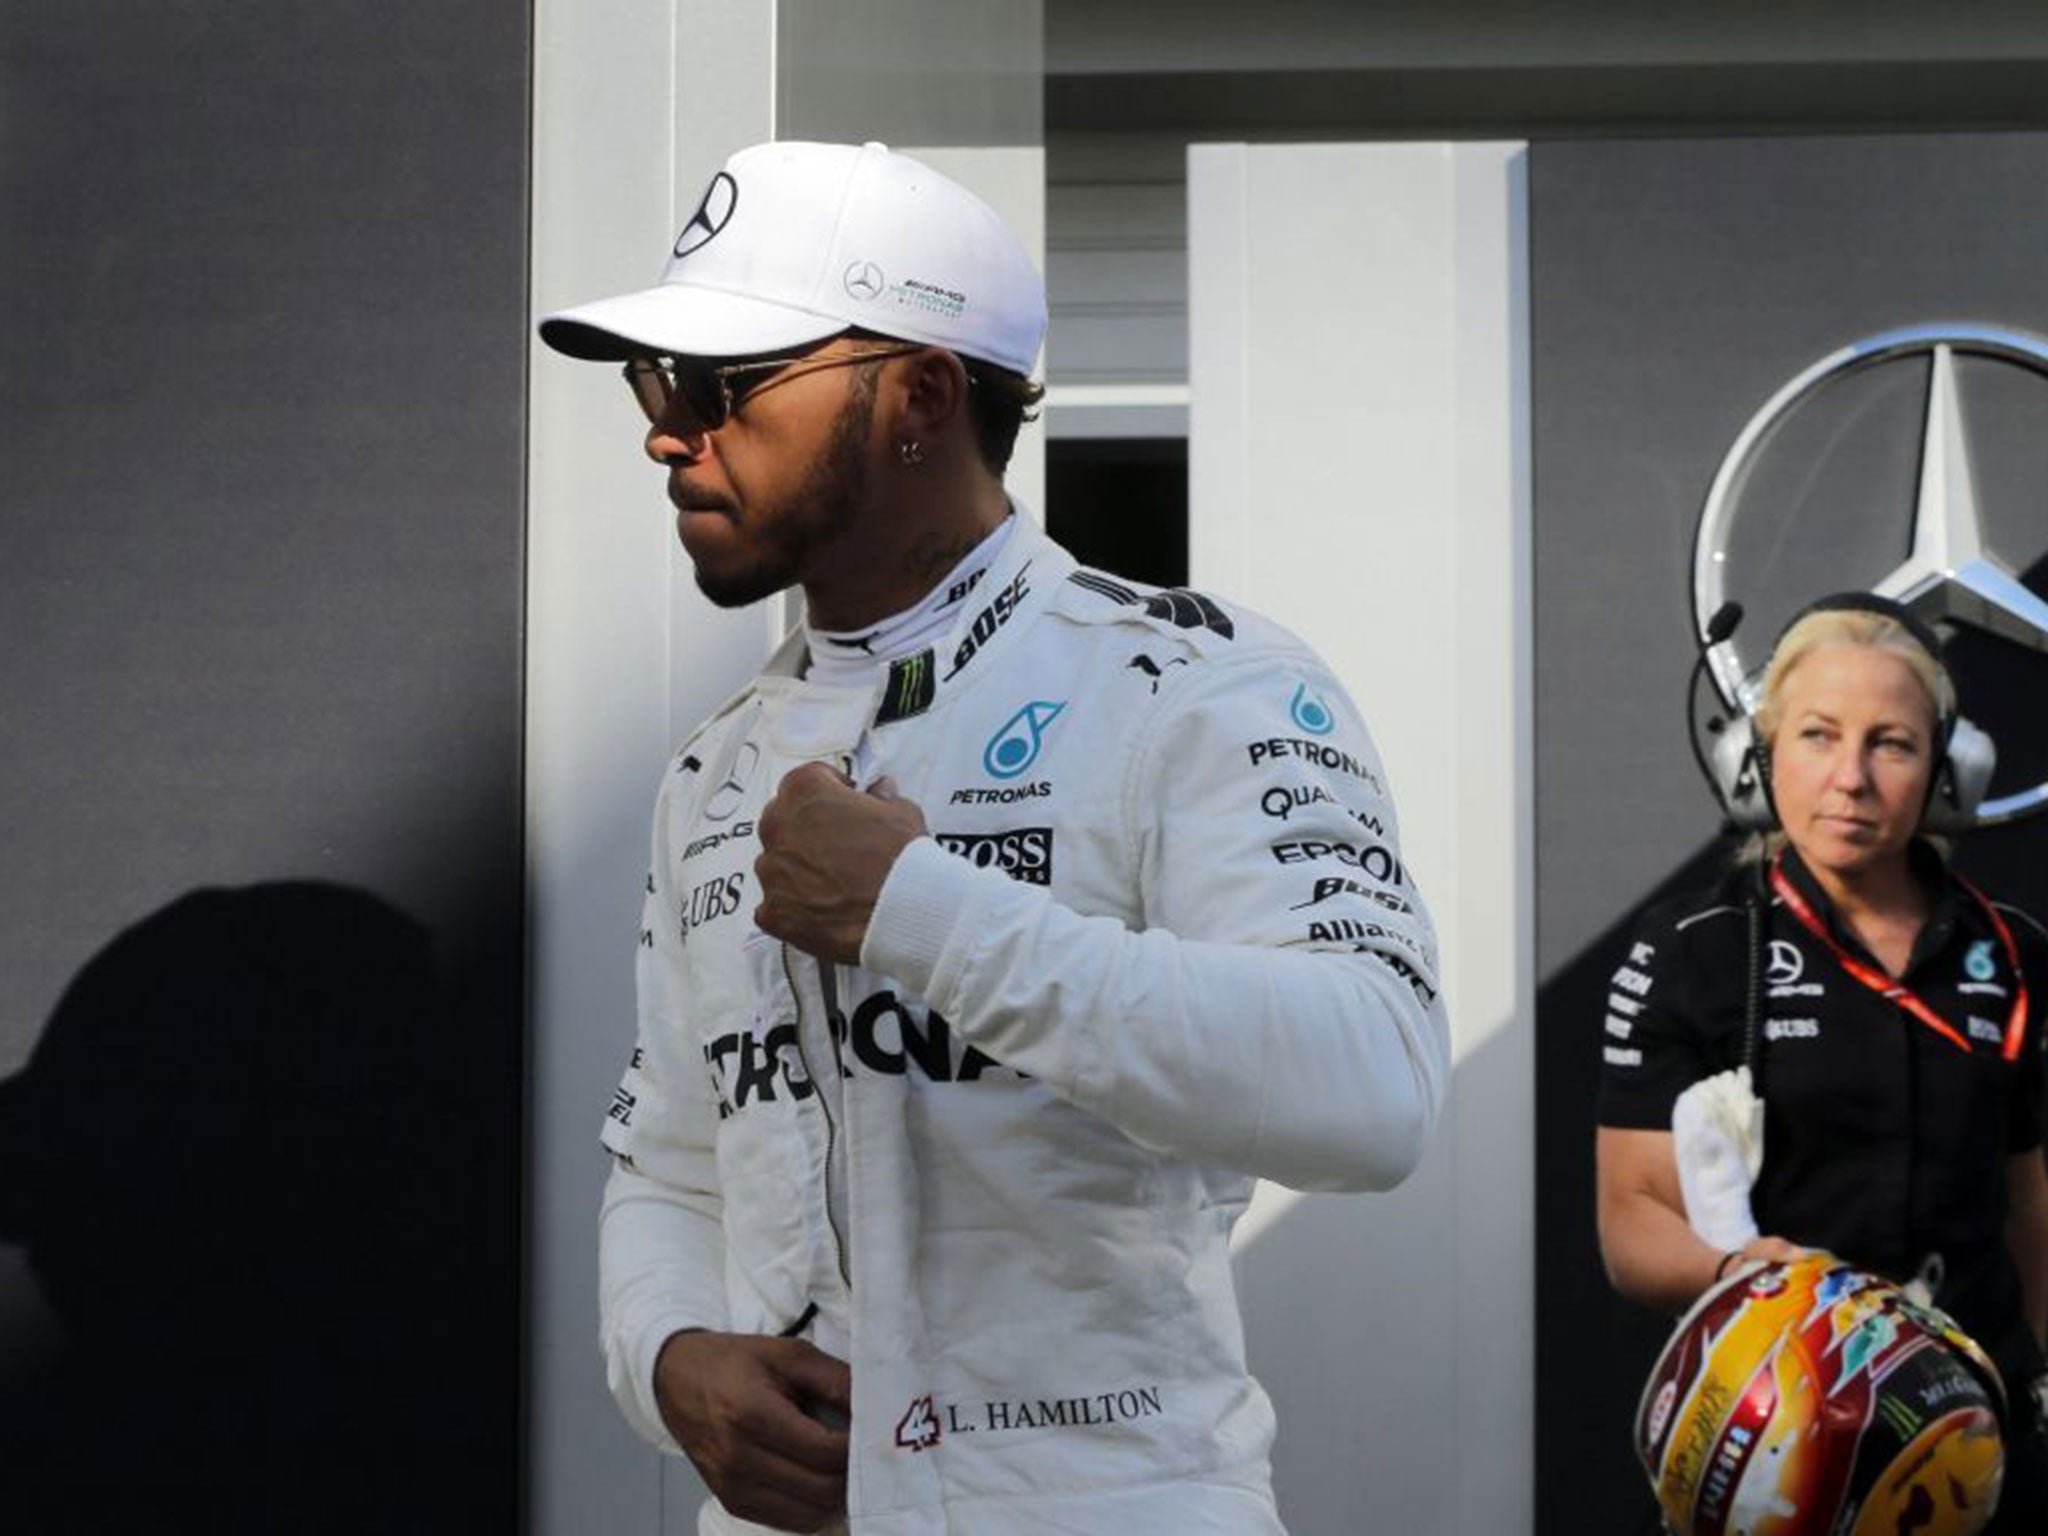 Lewis Hamilton dismissed Sebatian Vettel's claims that Mercedes have more pace than they are showing